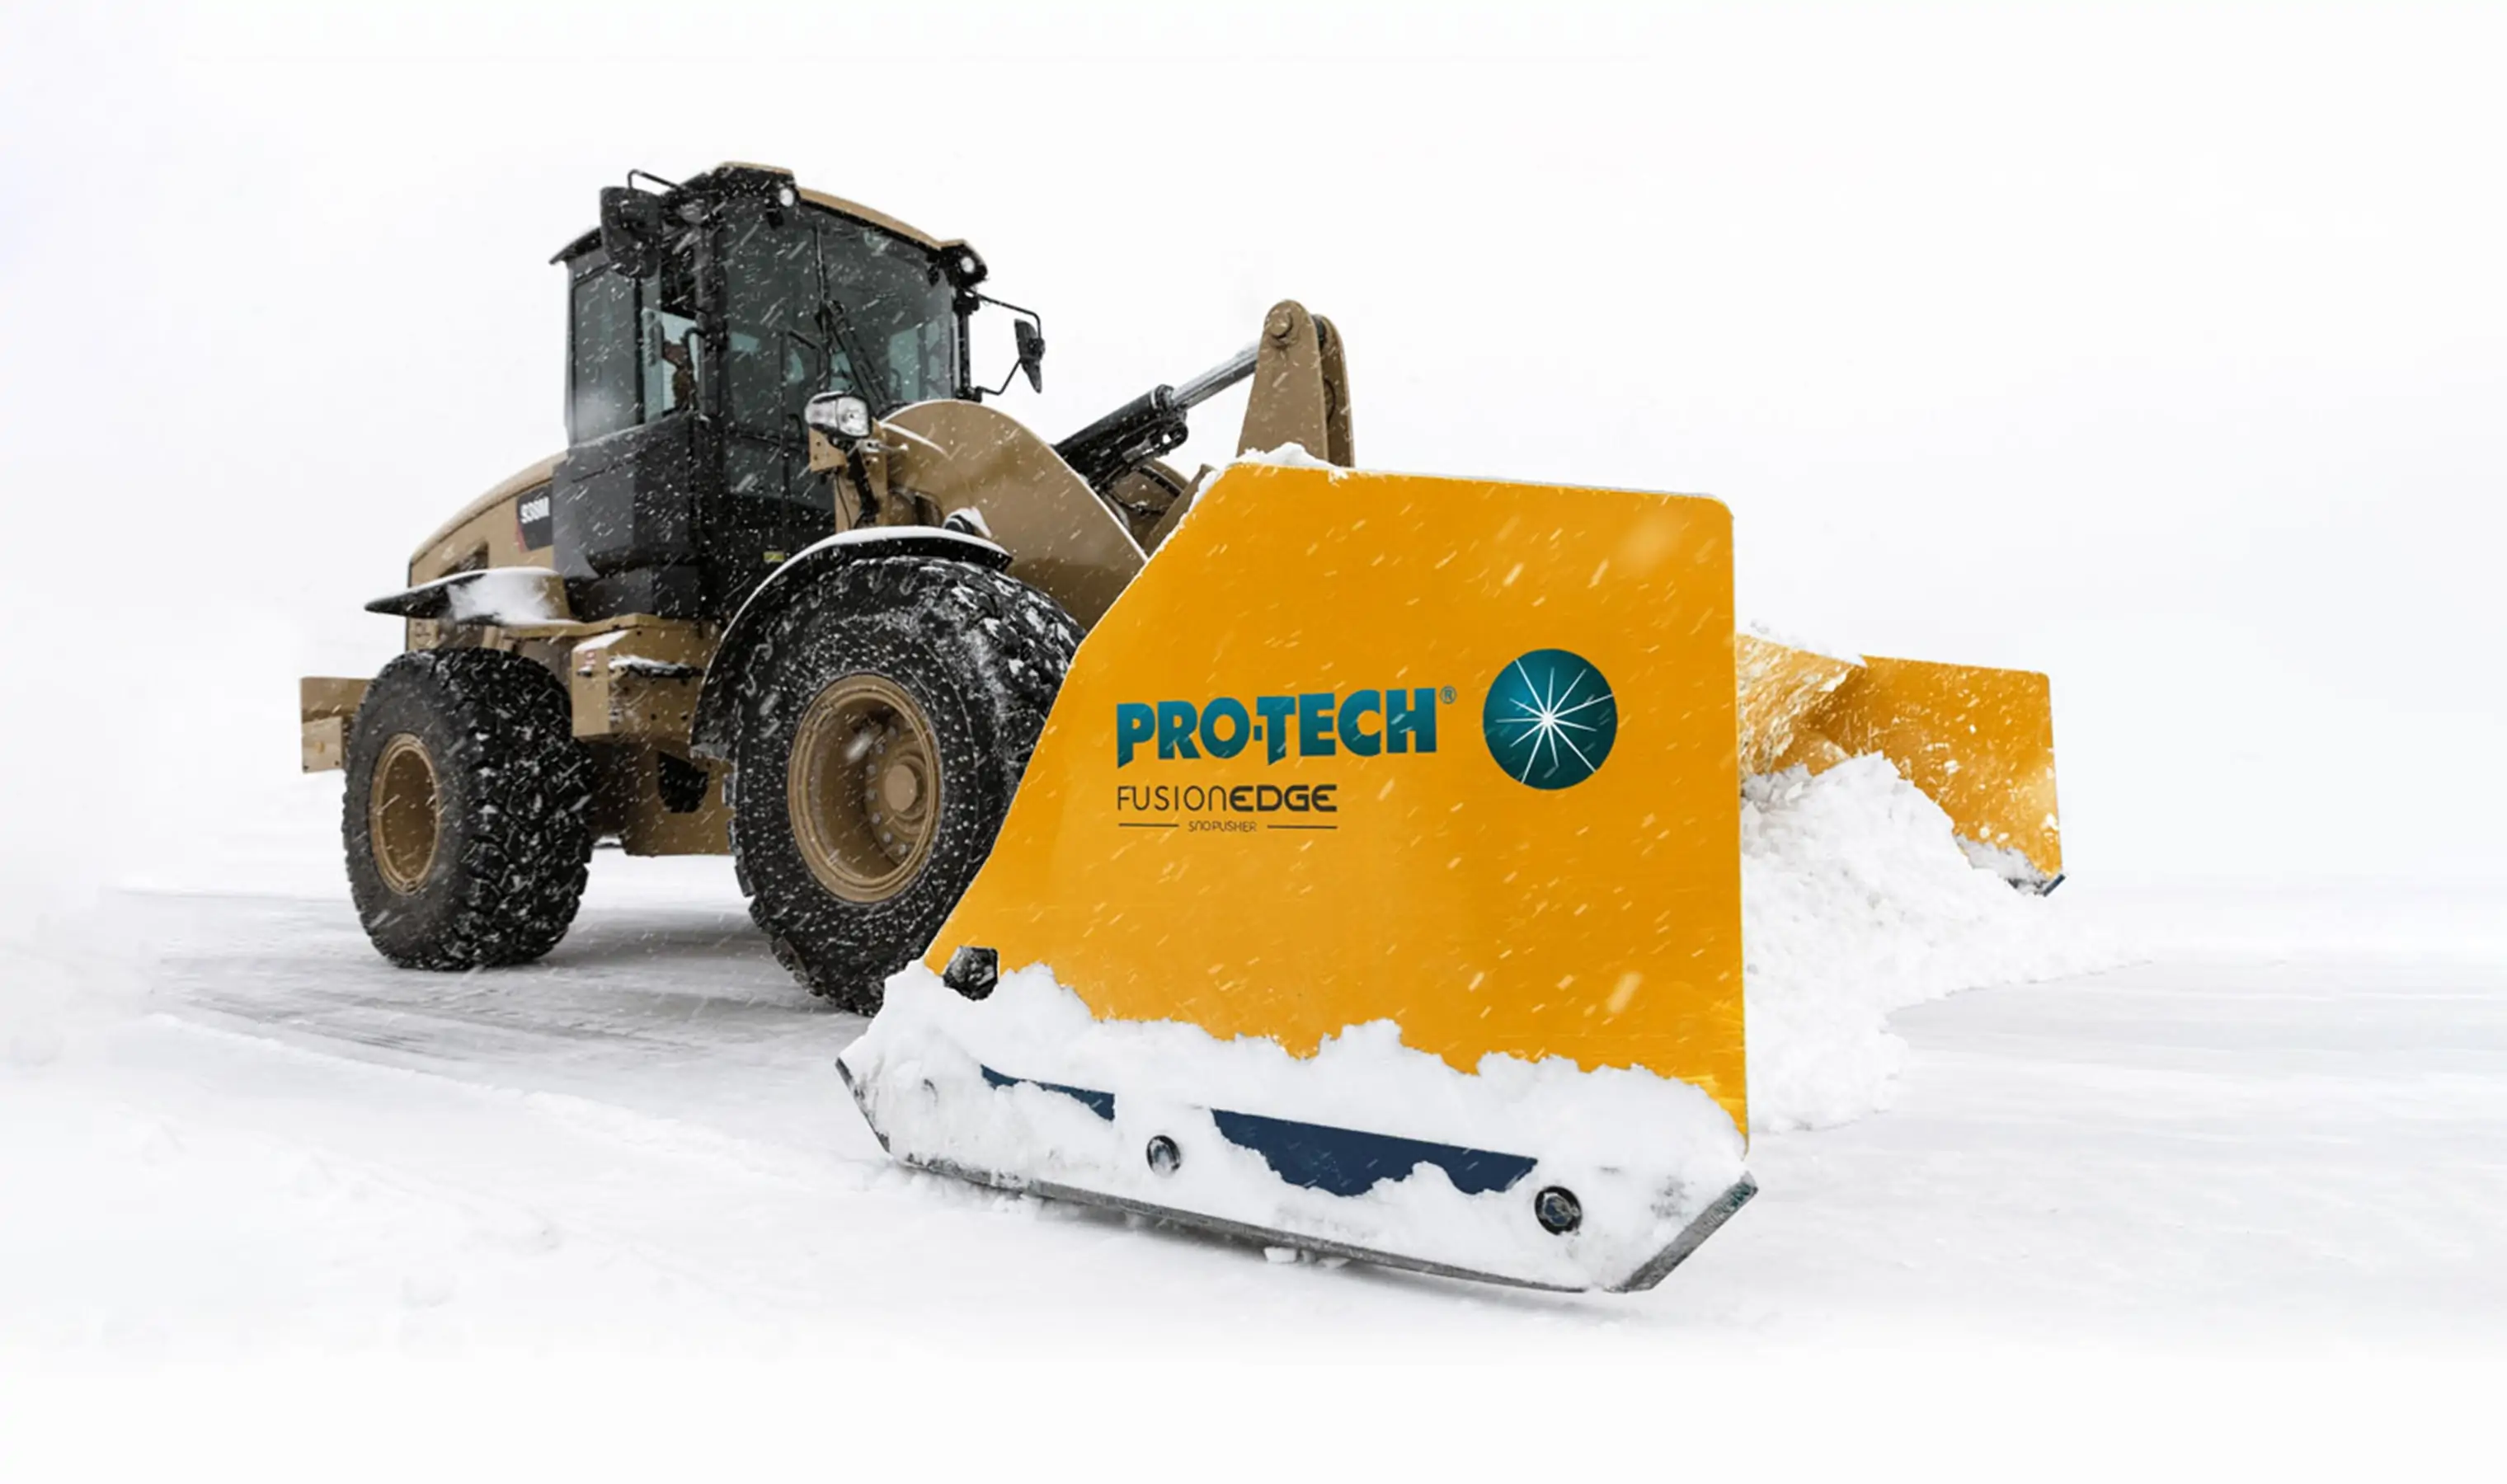 image from Pro-tech website, snow plow in the snow